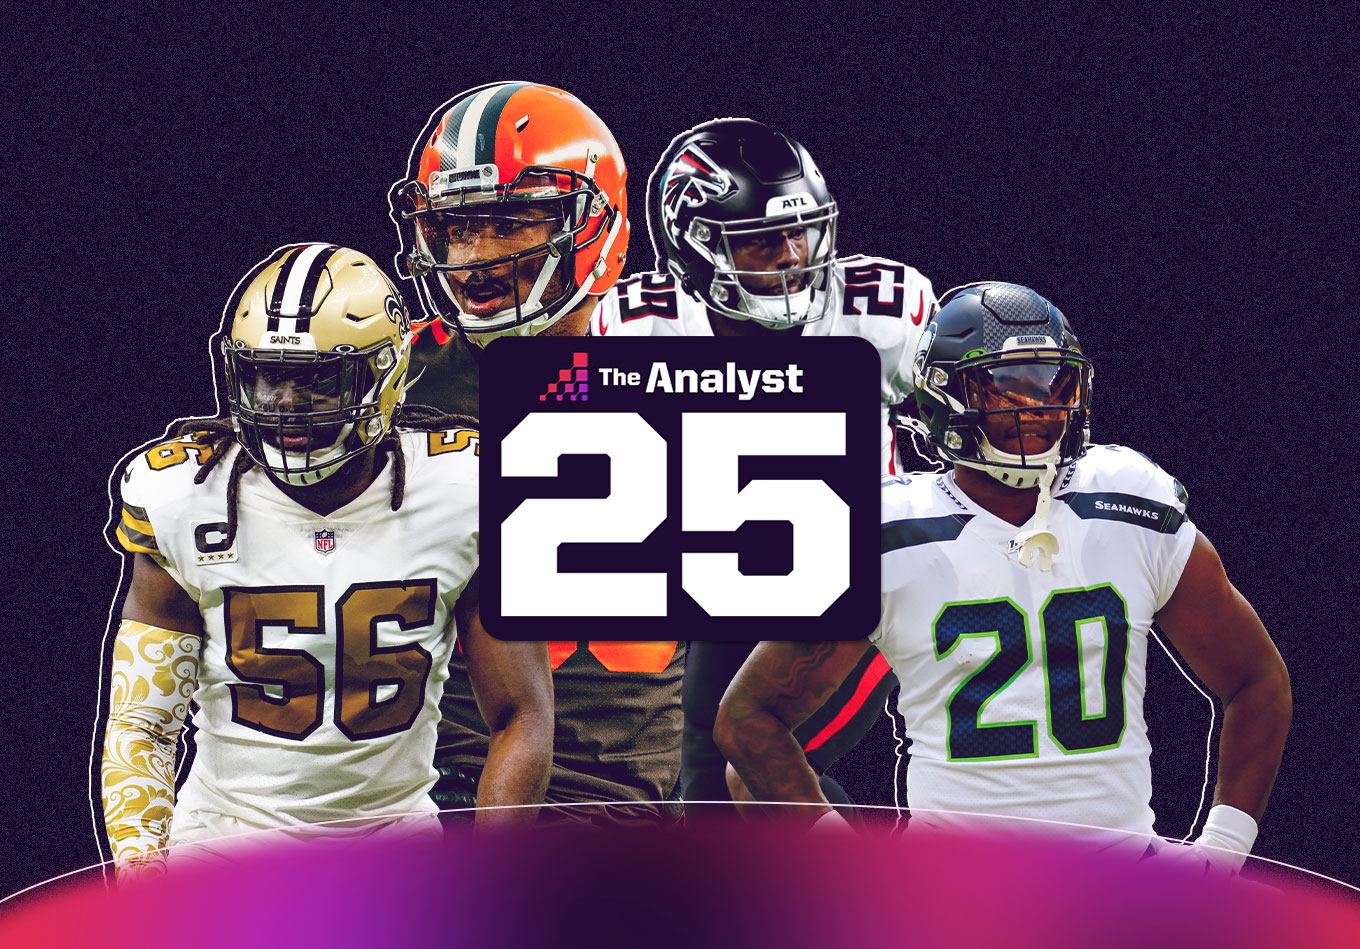 NFL Players to Watch in 2022: The Analyst 25